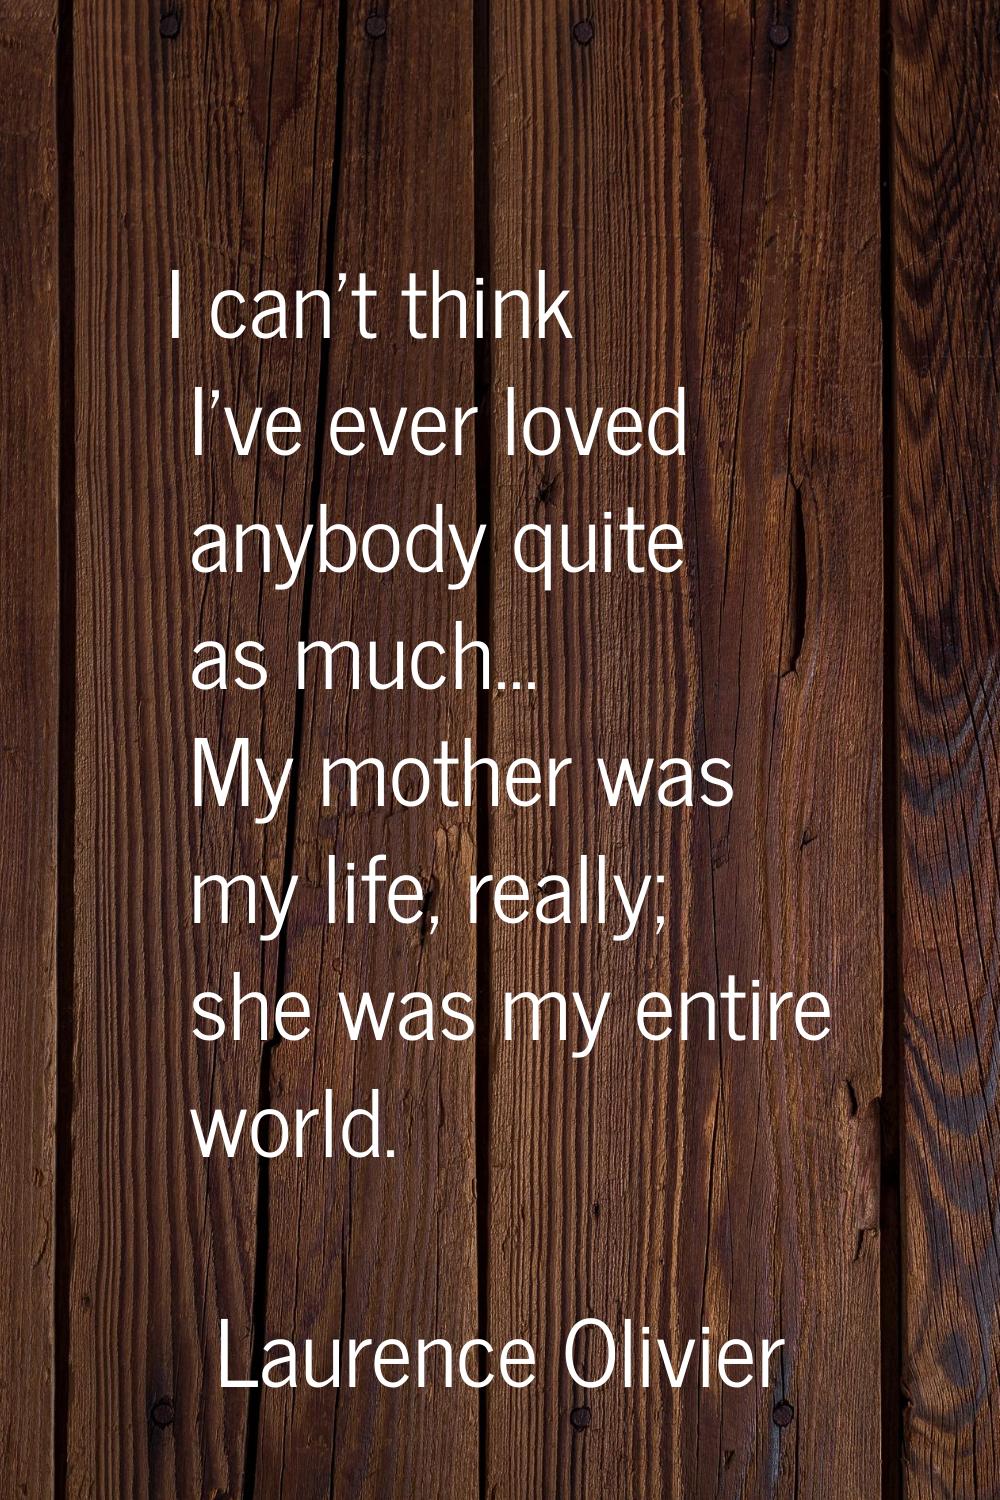 I can't think I've ever loved anybody quite as much... My mother was my life, really; she was my en